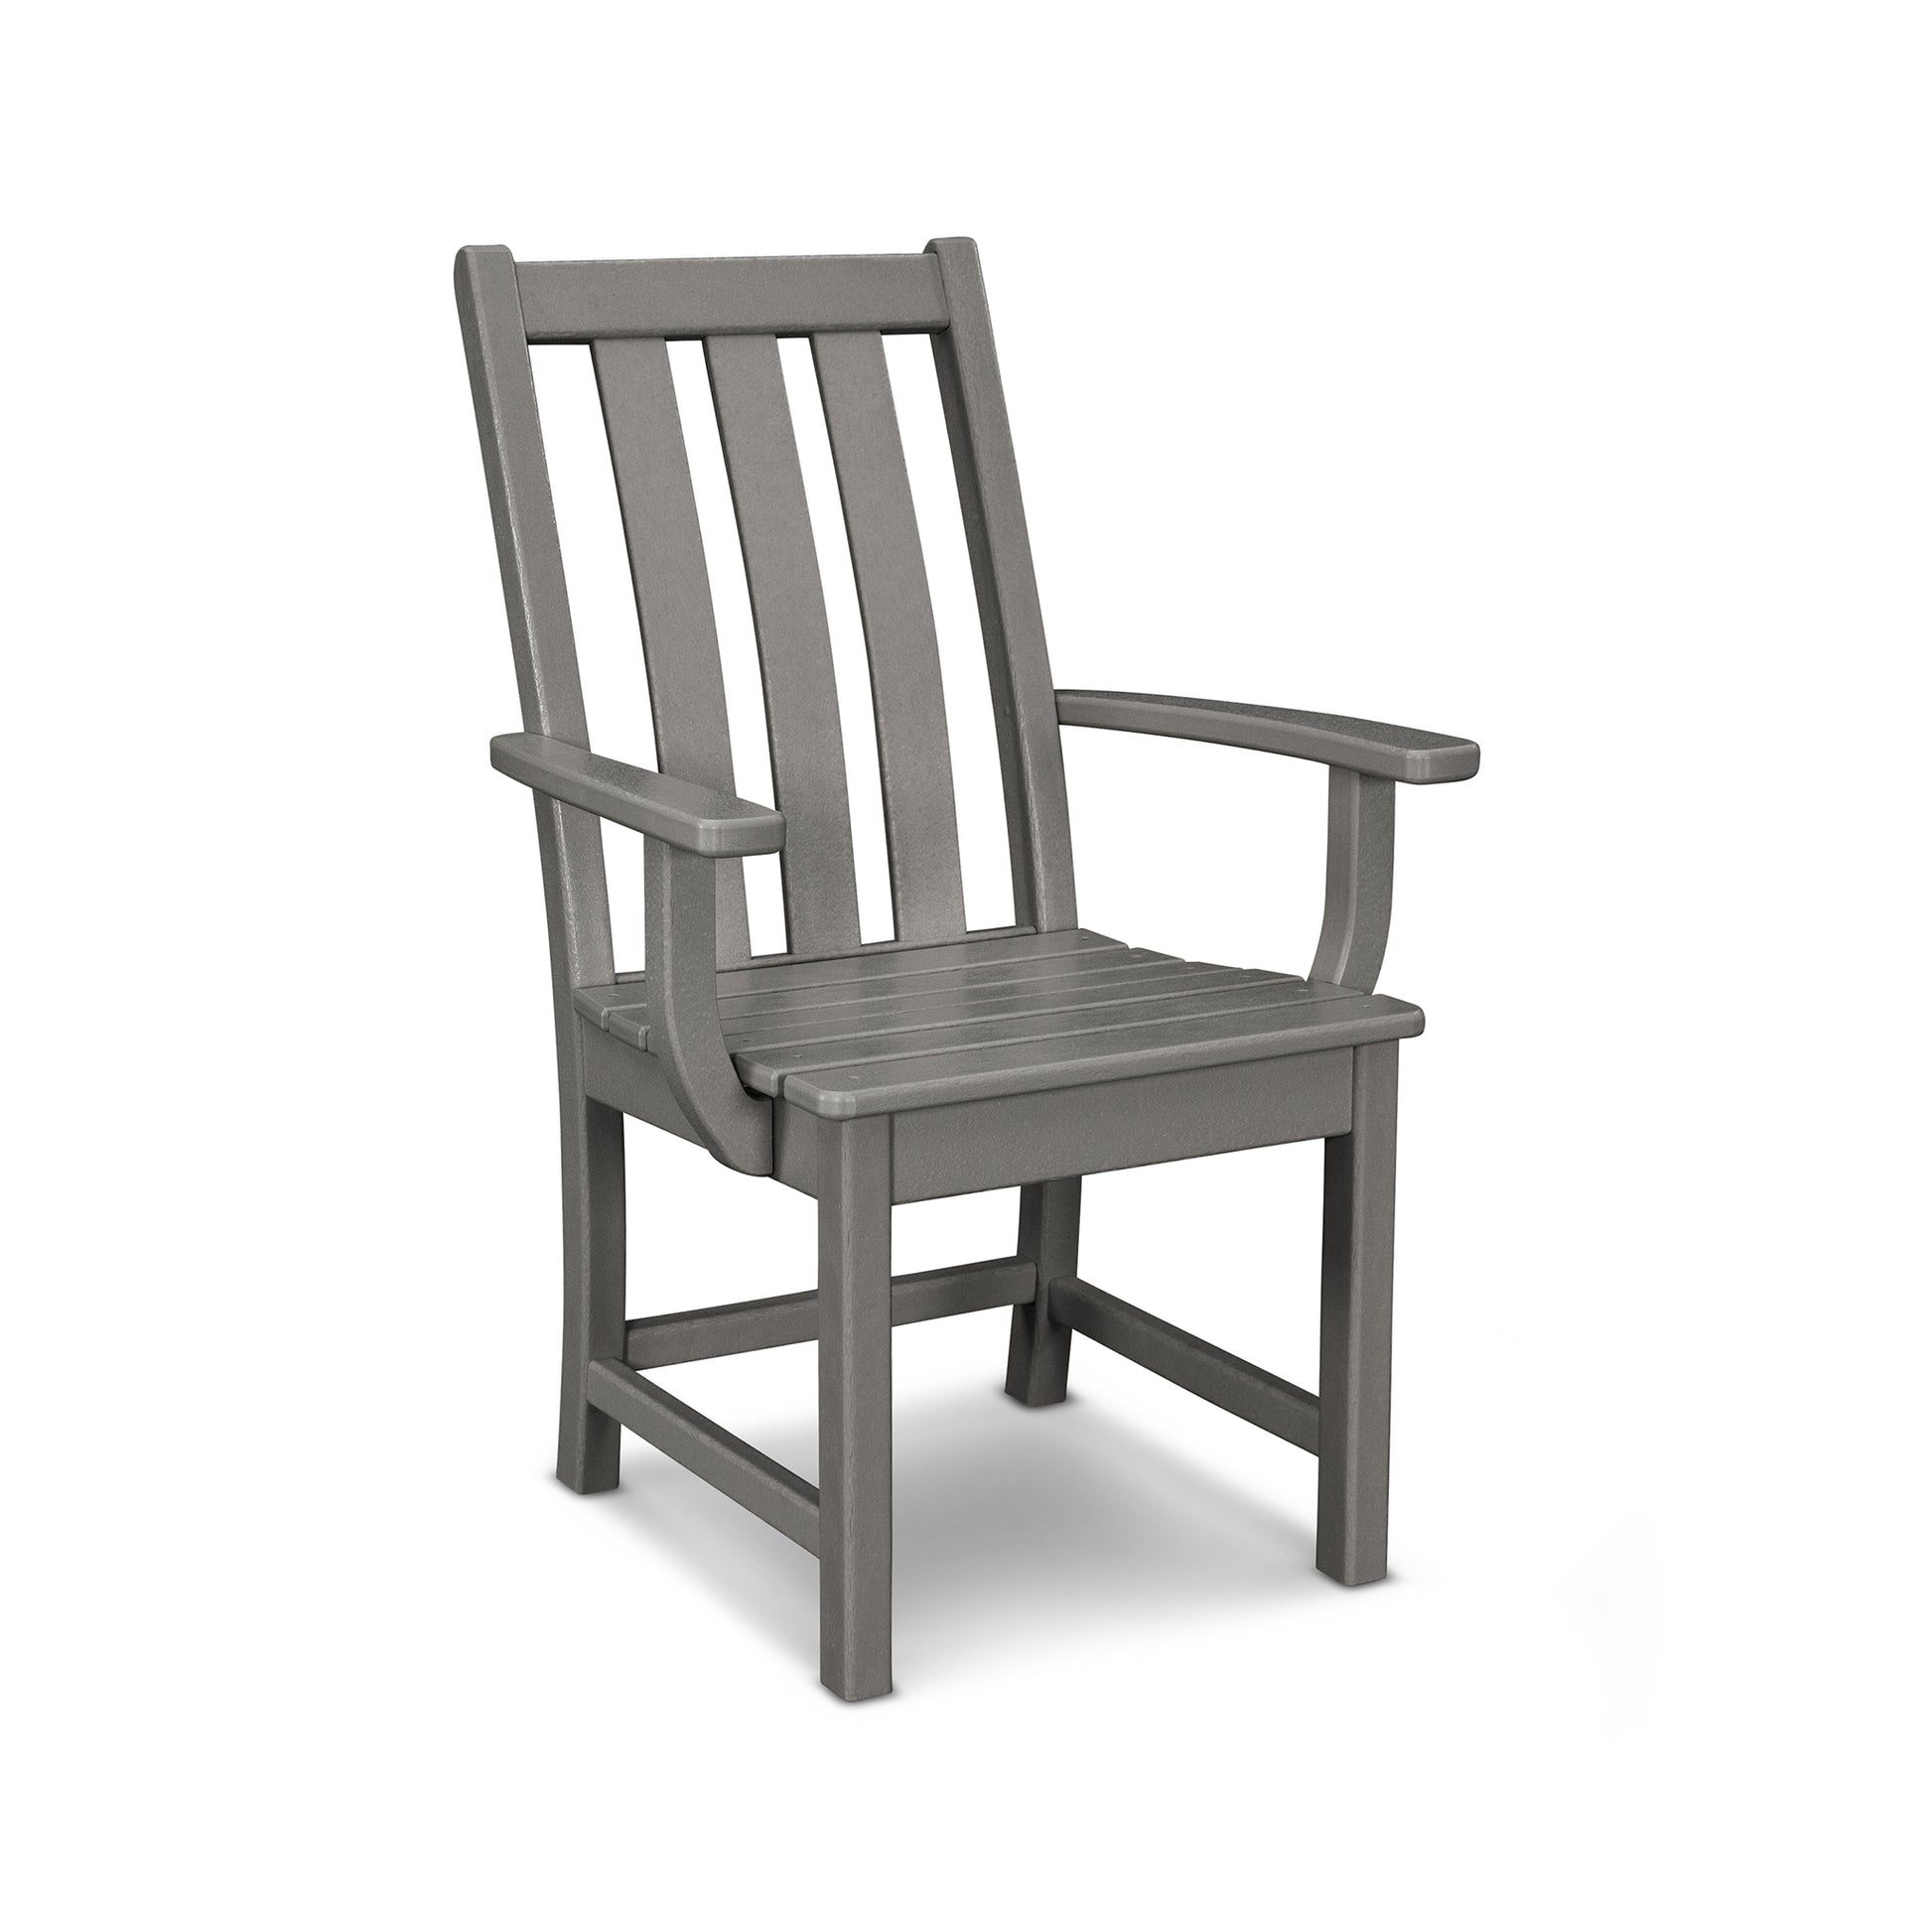 A single gray POLYWOOD Vineyard Dining Arm Chair made of plastic, featuring a slatted design and armrests, isolated on a white background.